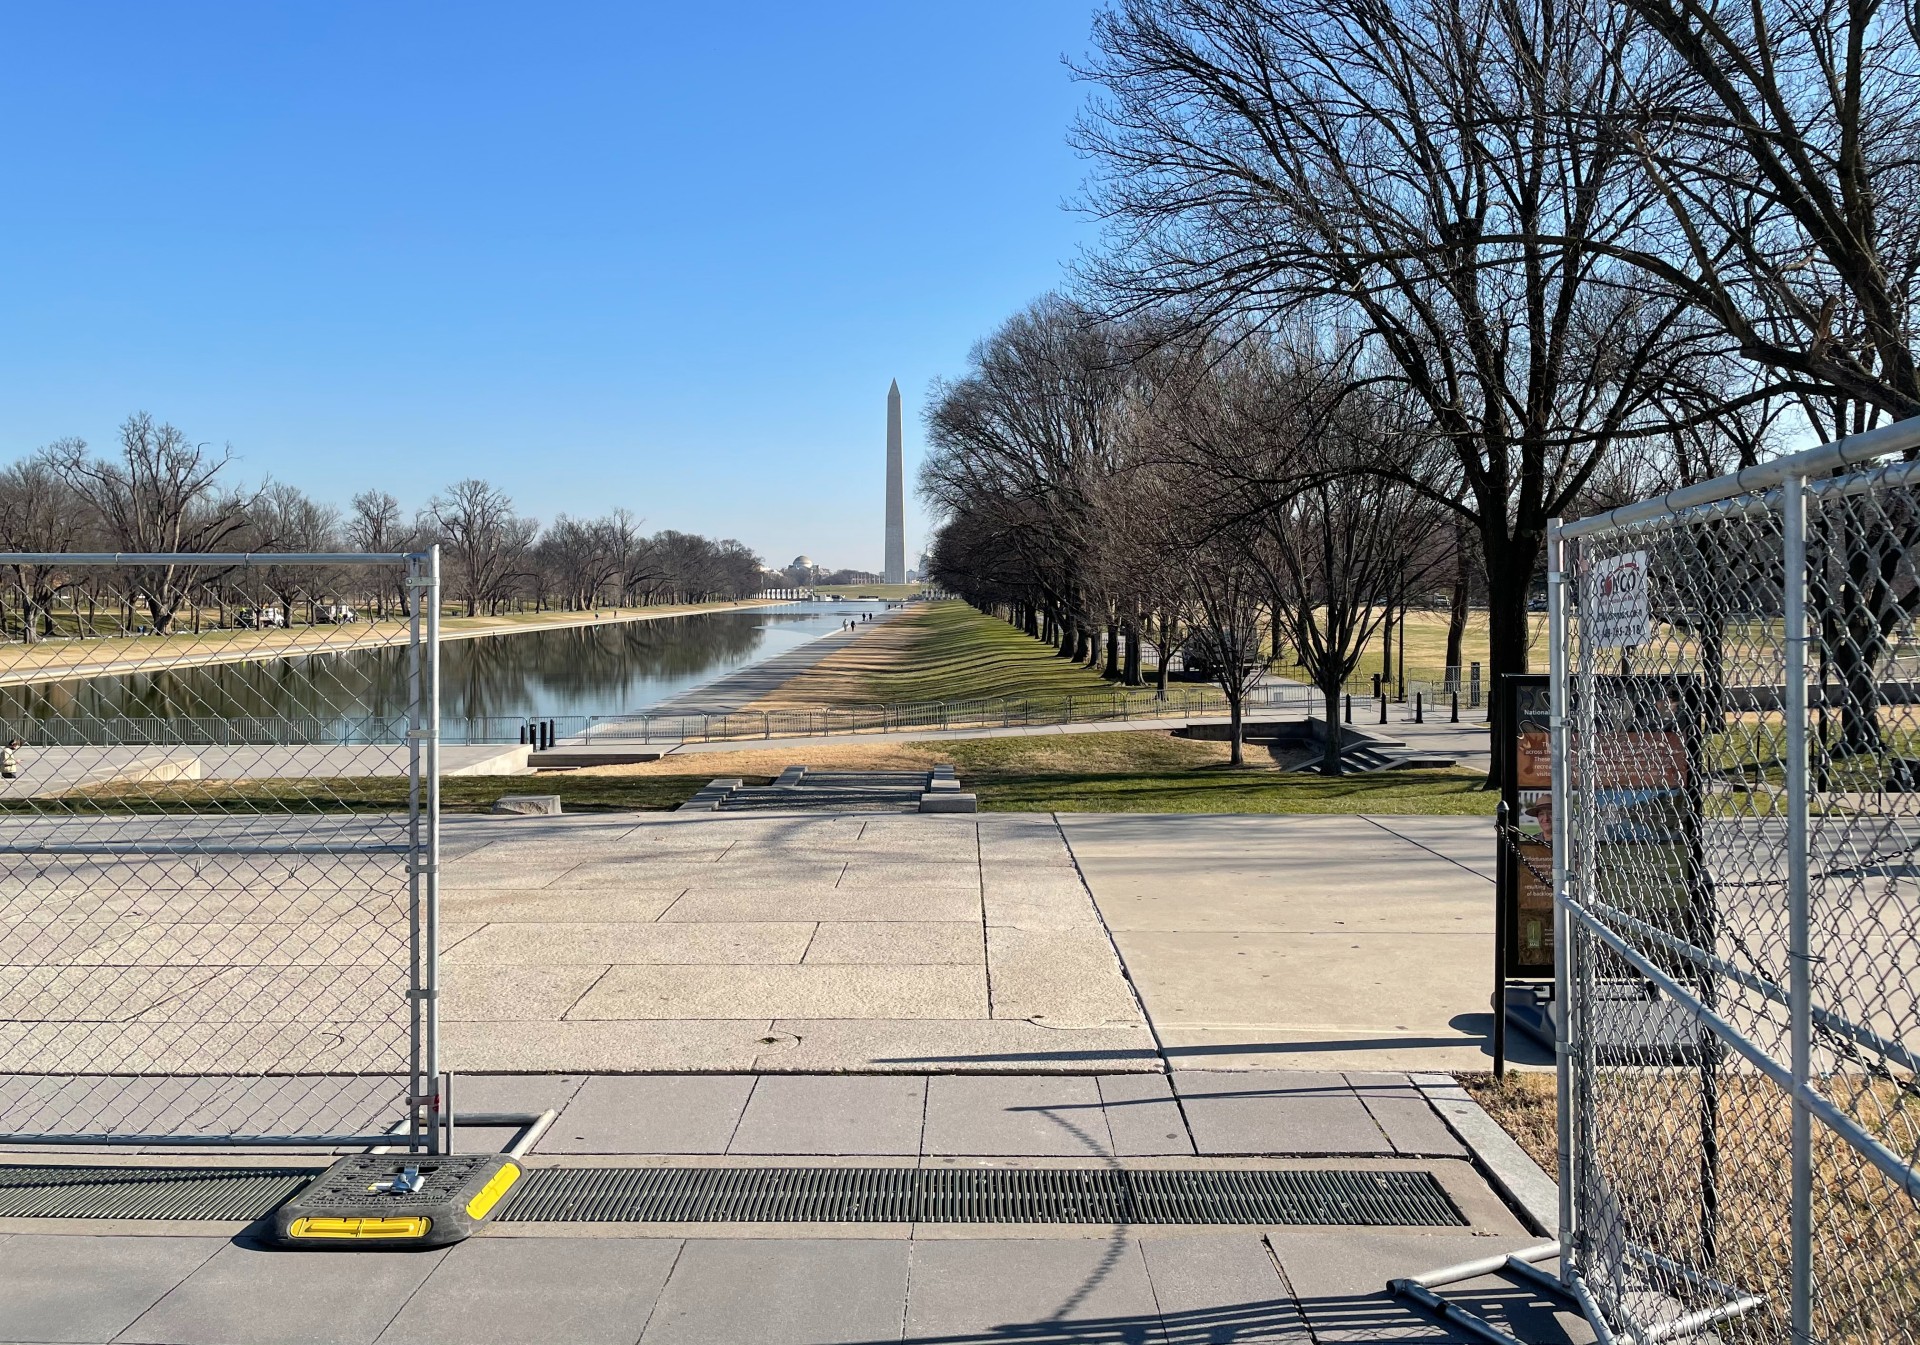 Chain link fence borders a walkway leading down to a long reflecting pool and the tower of the Washington Monument in the distance.